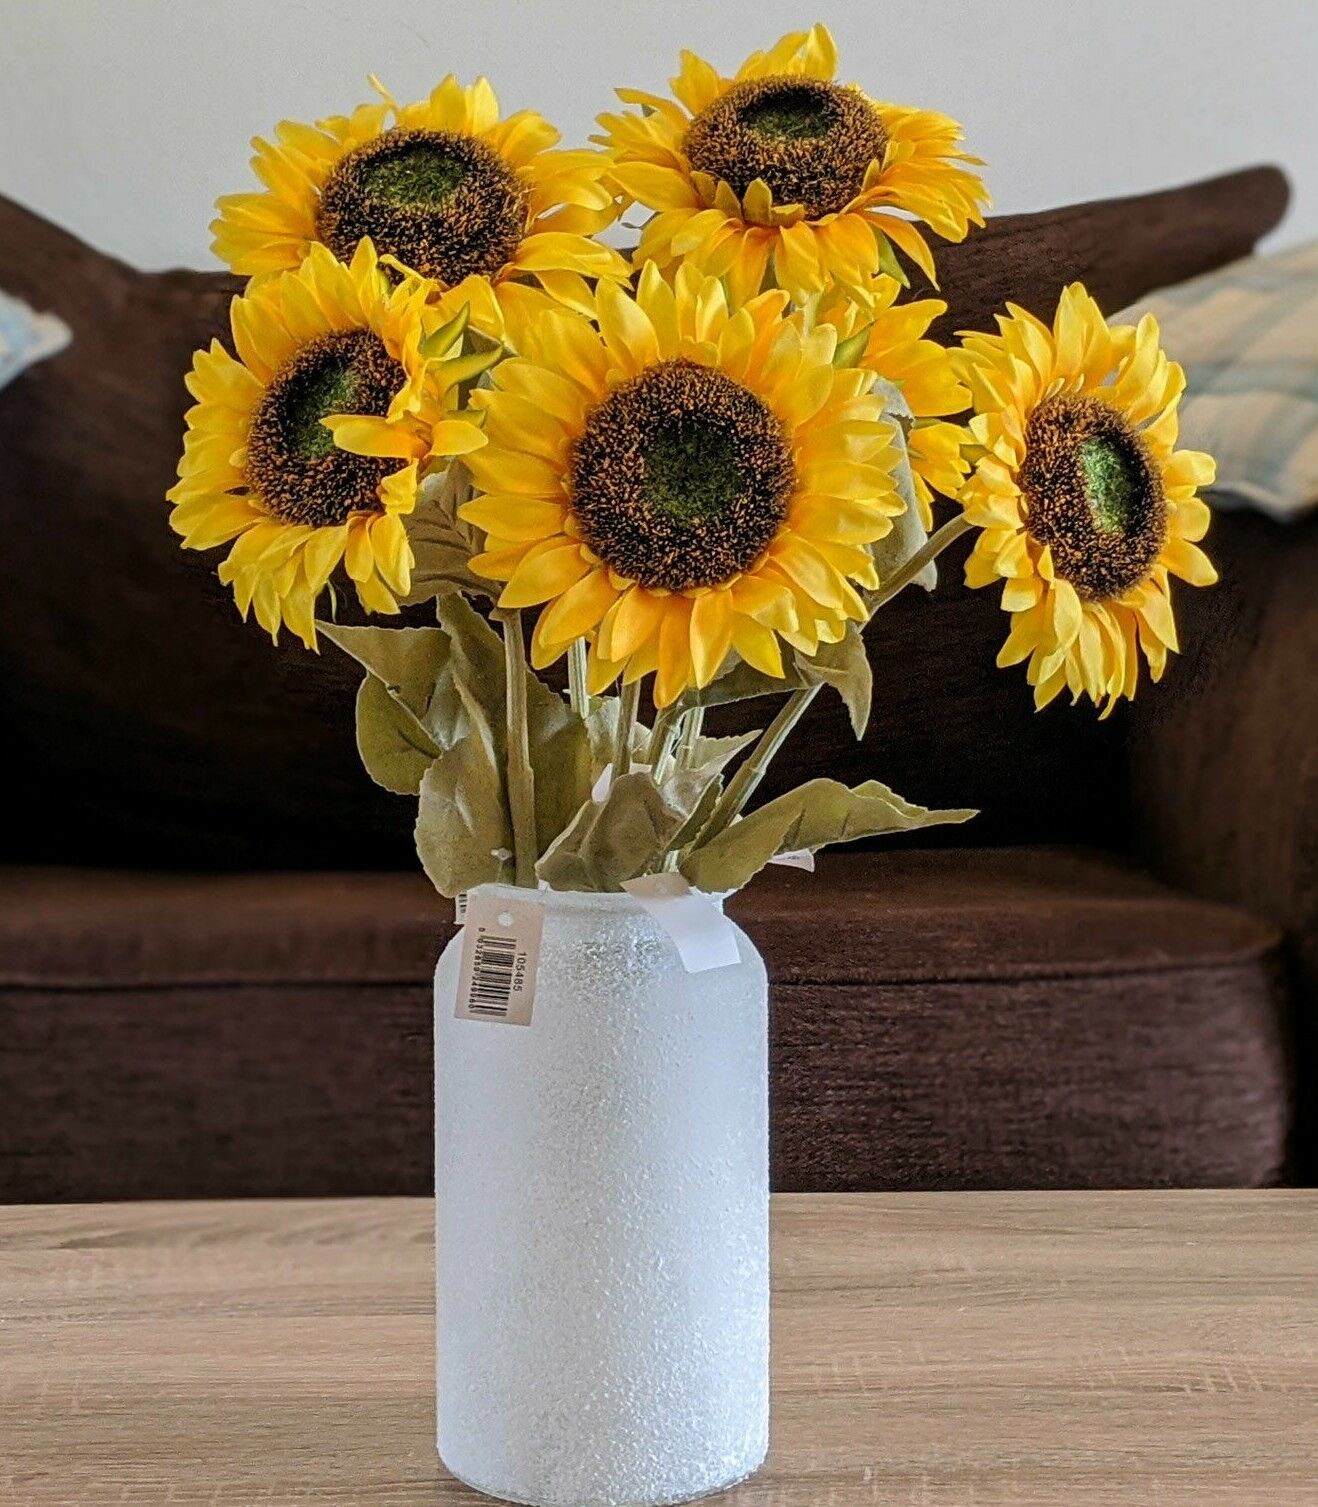 Blooms That Last: Maximizing the Lifespan of Sunflowers in a Vase插图4